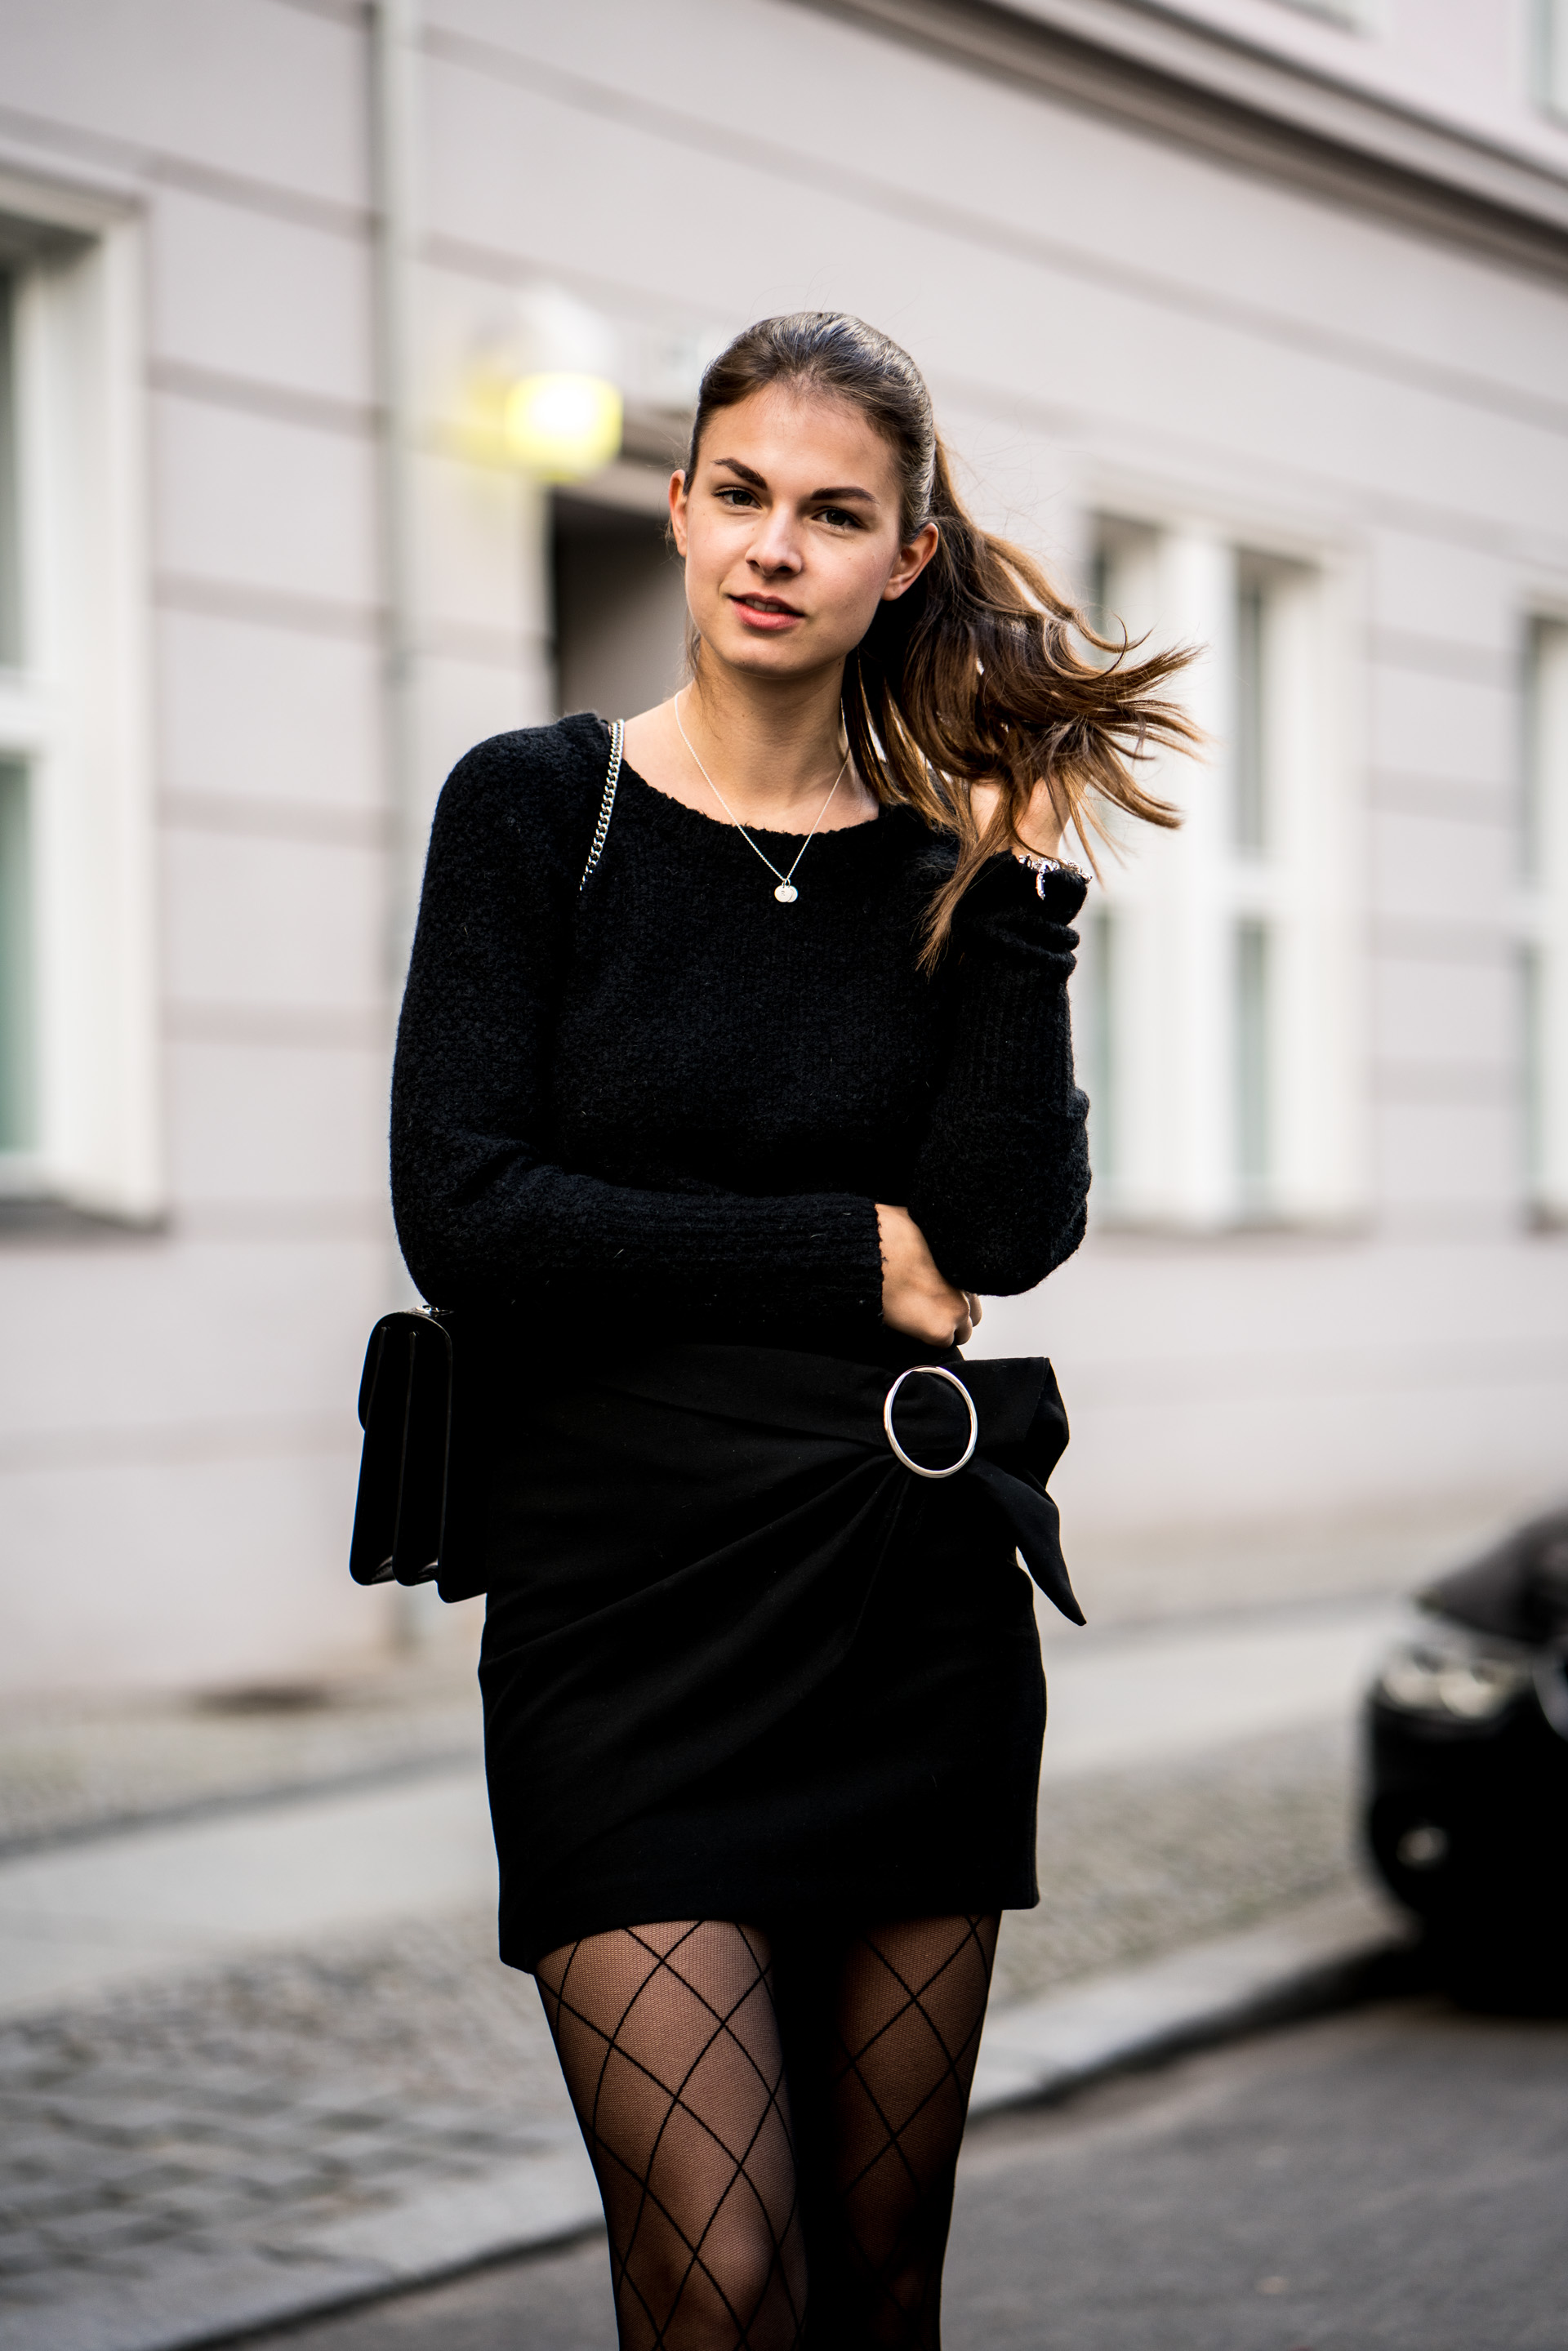 Black Skirt and Fishnet Tights || Casual Chic Outfit